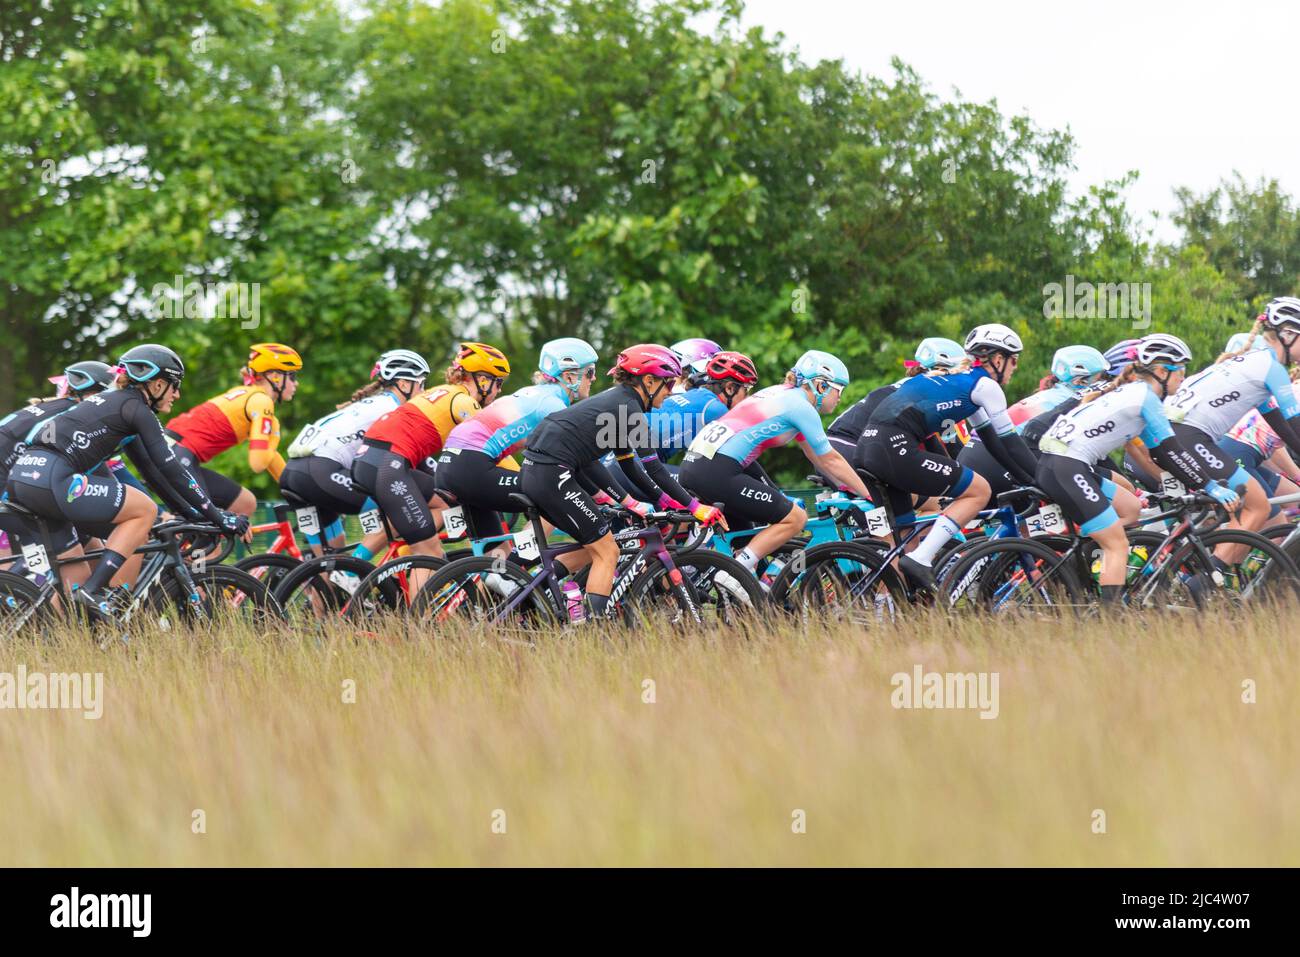 Cyclists at Colchester Sports Park racing in the UCI Women’s Tour cycle race Stage 1 heading out into Essex countryside. Stock Photo